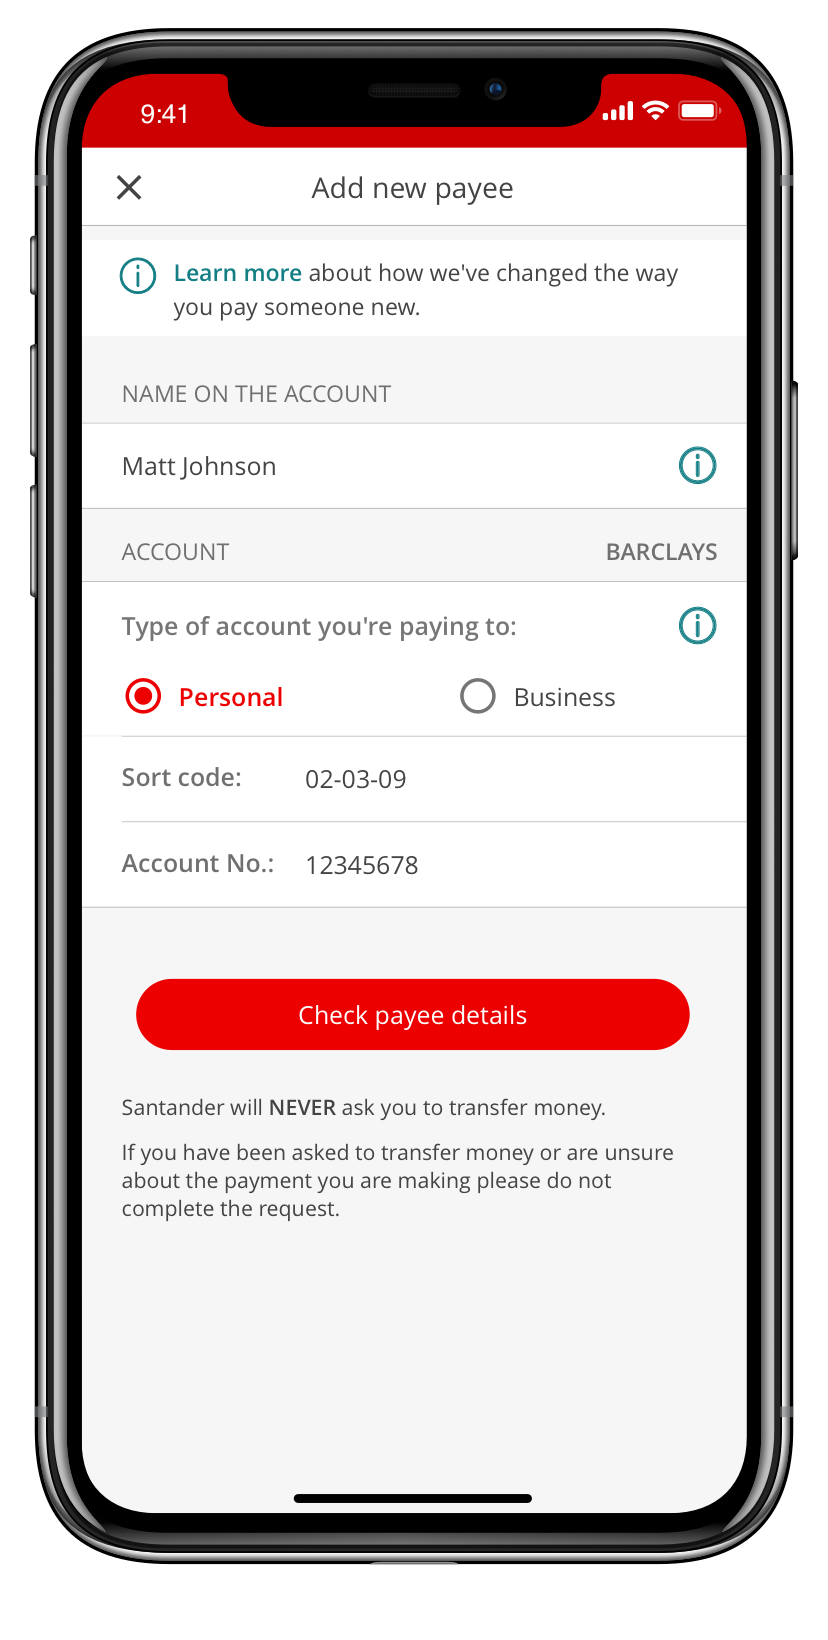 A screen in Mobile Banking to add a new payee.